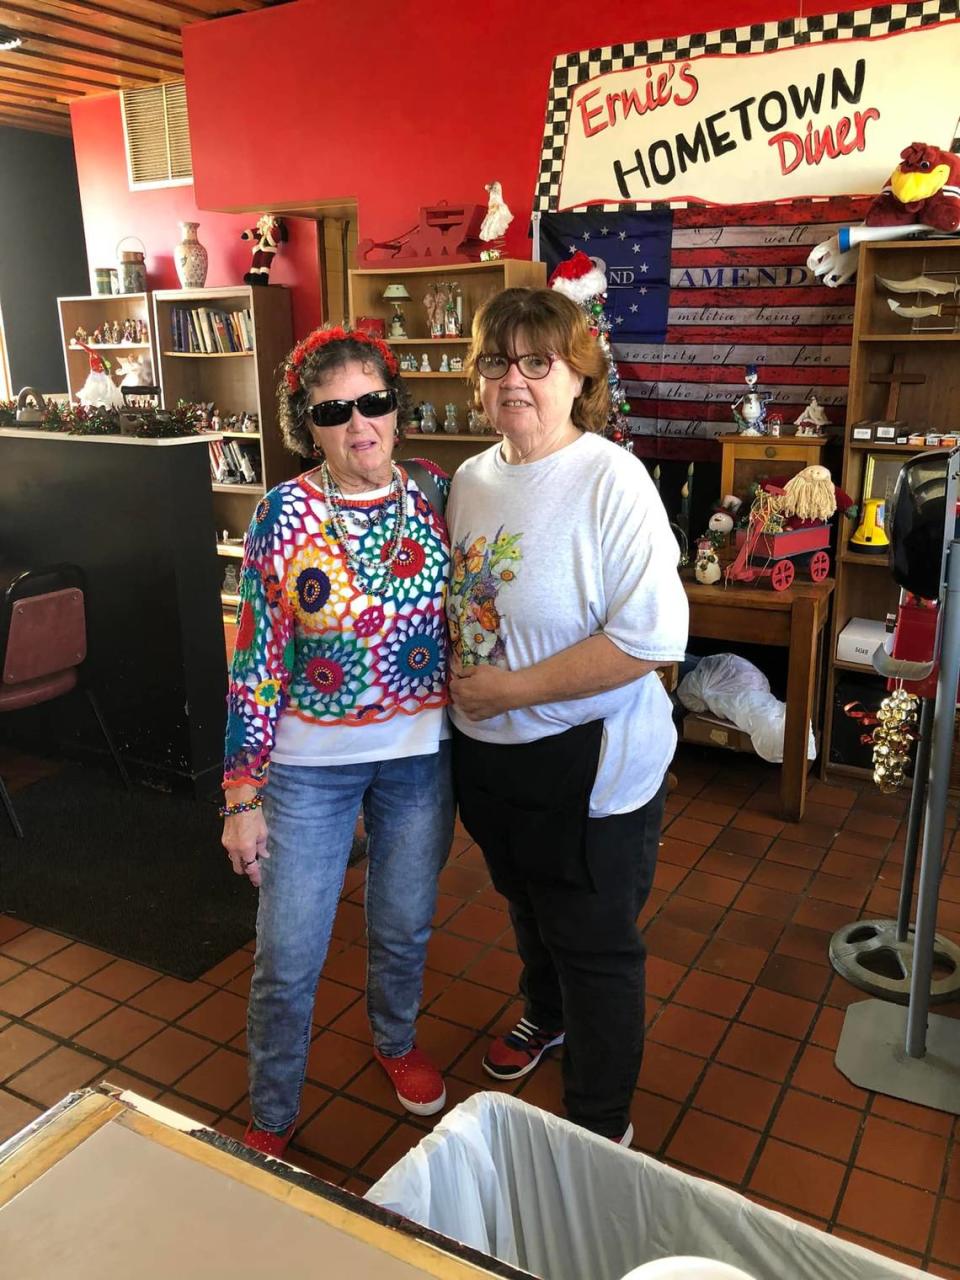 Mary Ward, left, and her daughter Tammy Ward, right, standing in Ernie’s Hometown Diner Courtesy of Mary Ward